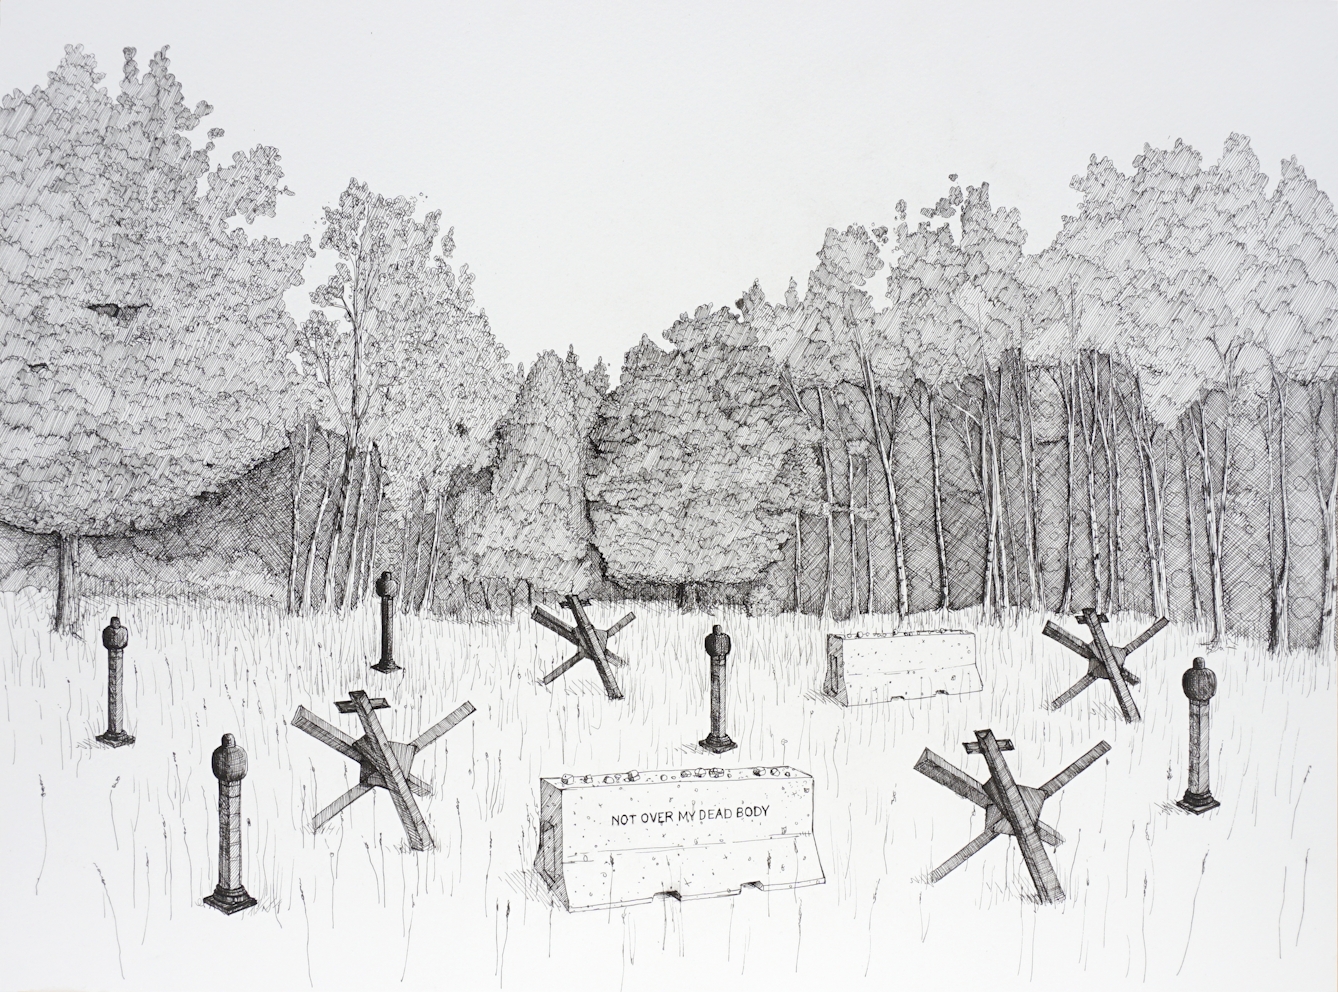 Pen and ink illustration on white textured paper. The illustration depicts a wooded scene in the background and a clearing in the foreground. in the foreground are several dark 3D forms which look like a cross between sea defences and tombstones. In the centre is a what looks like a concrete road barrier with the words, 'not over my dead body' inscribed on the side.